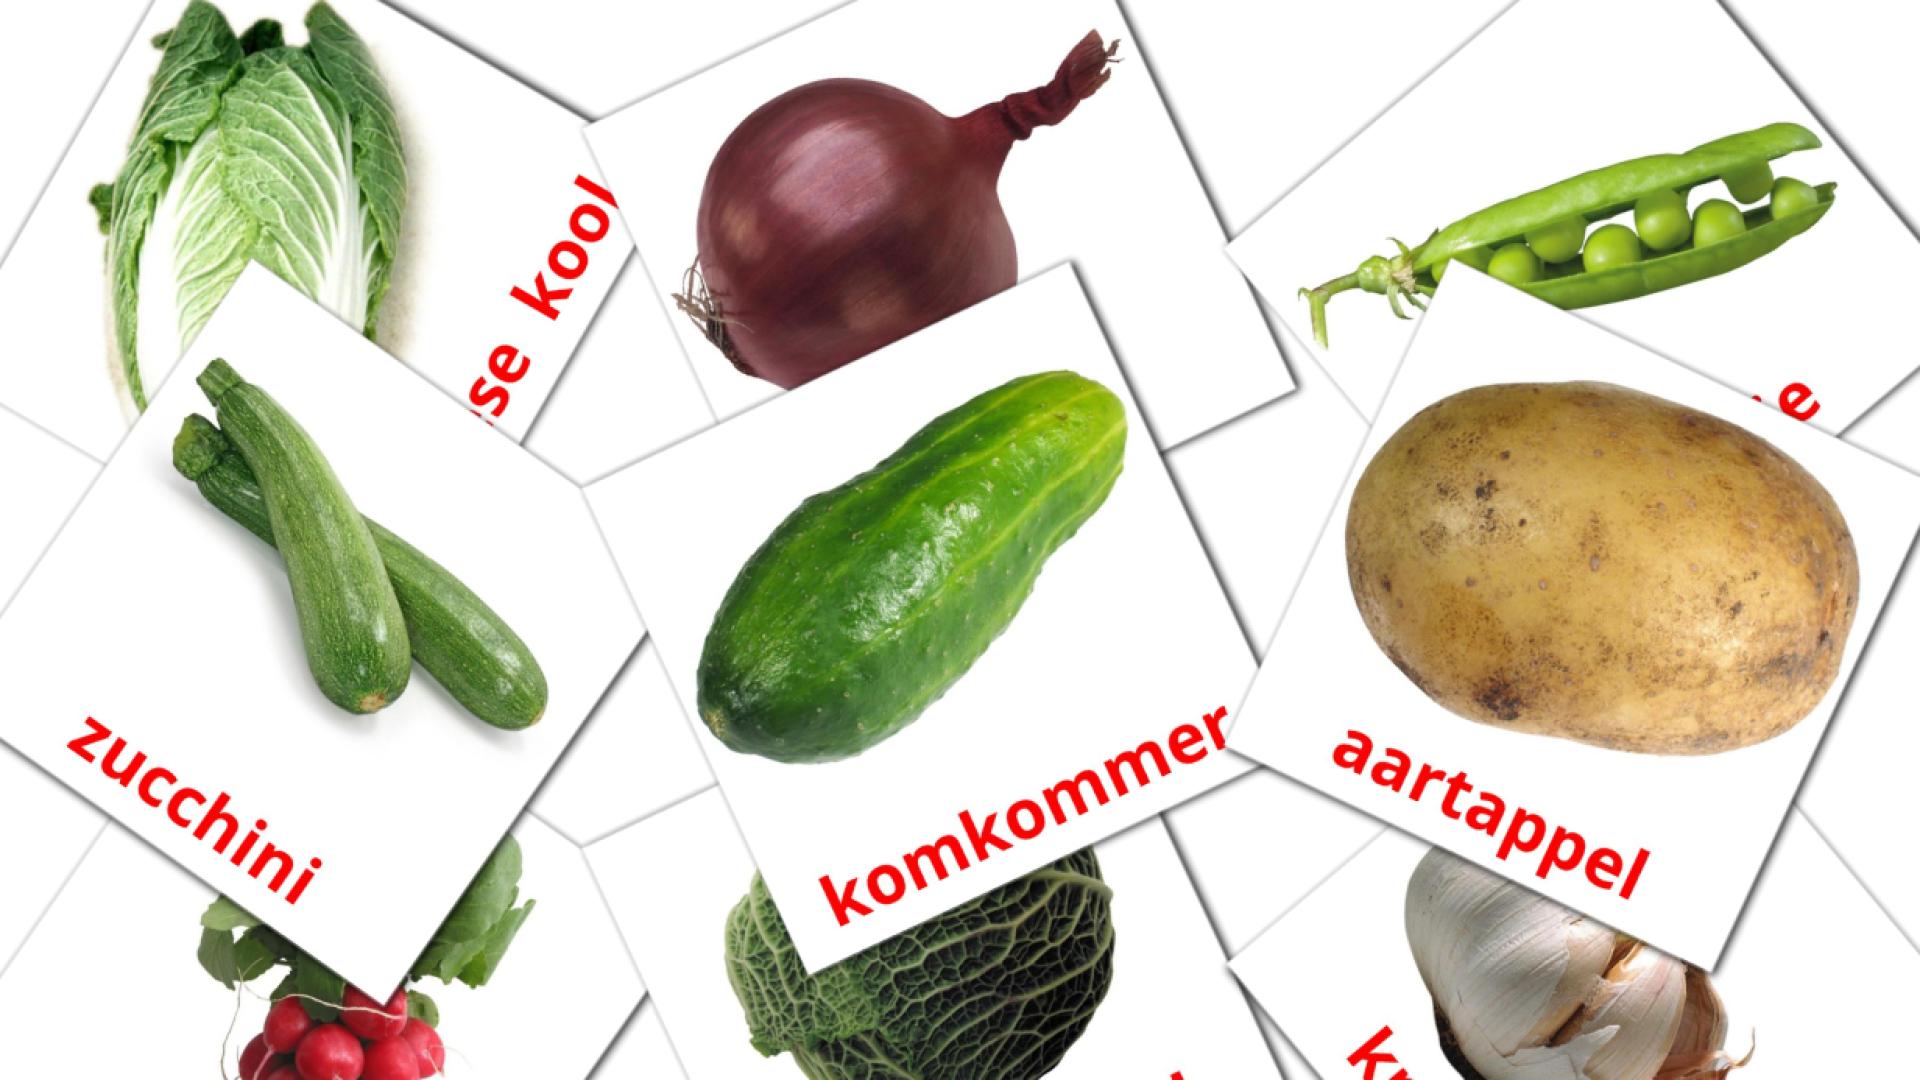 Vegetables - afrikaans vocabulary cards